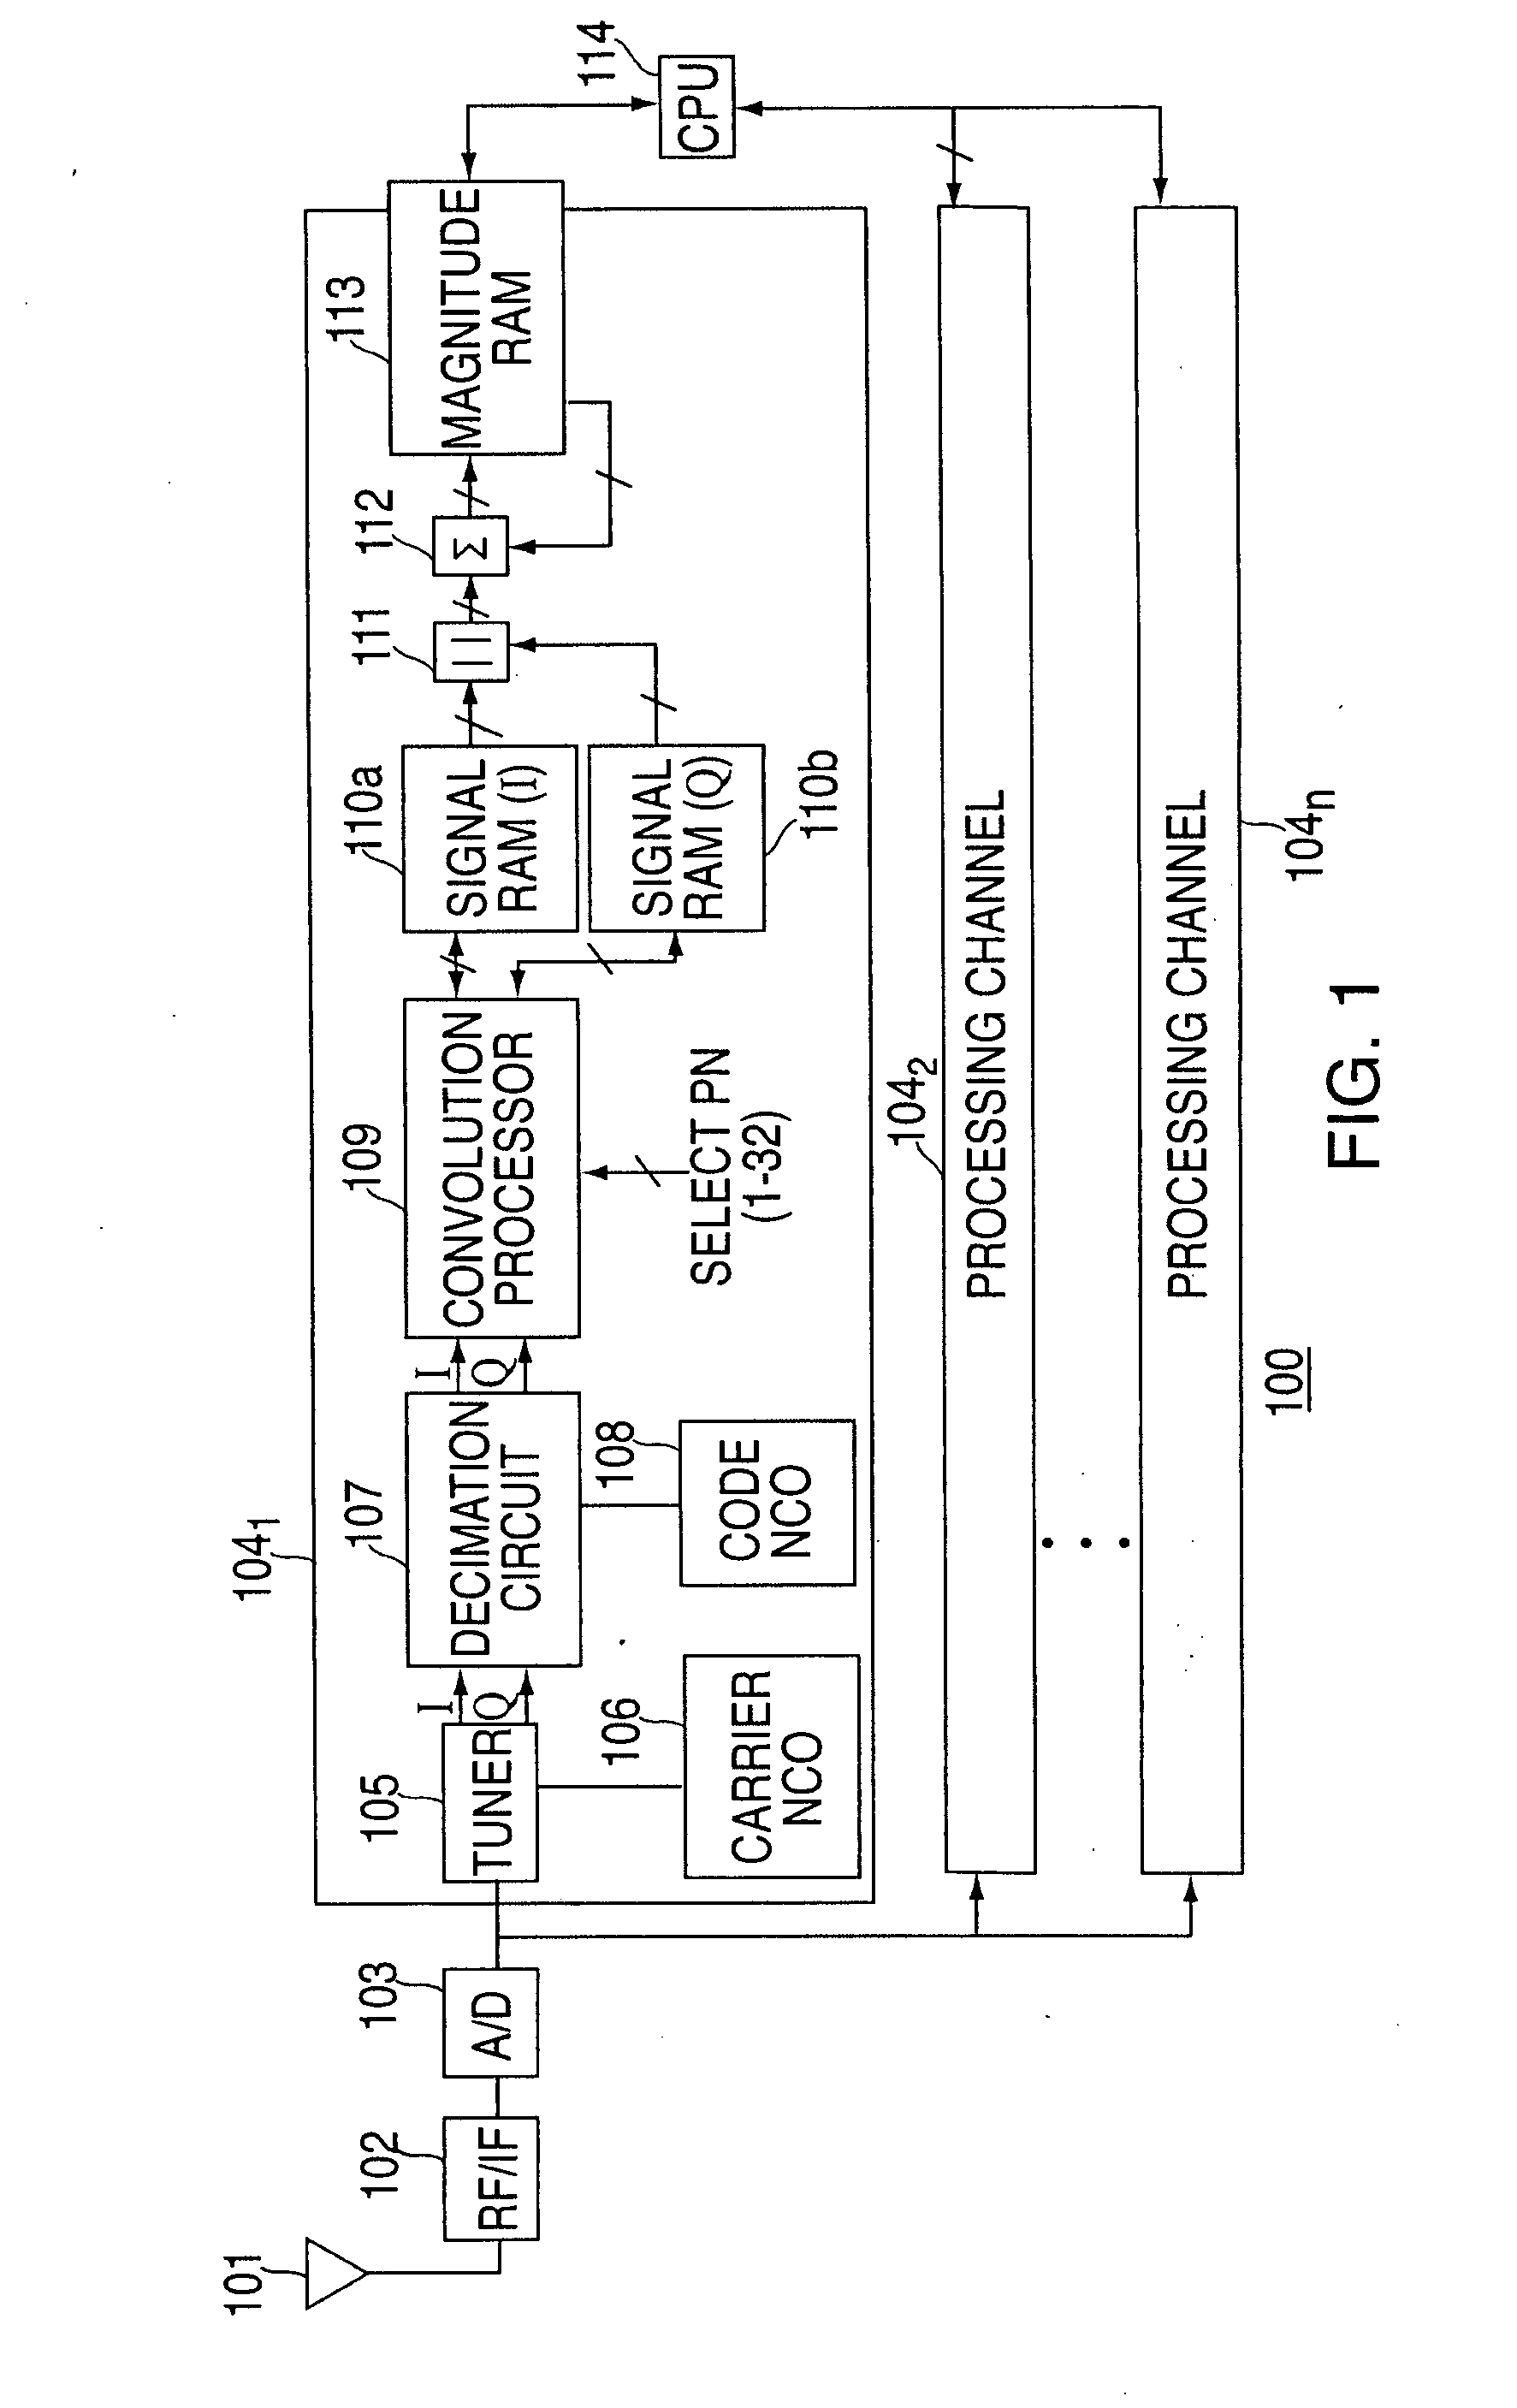 Method and apparatus for performing signal correlation